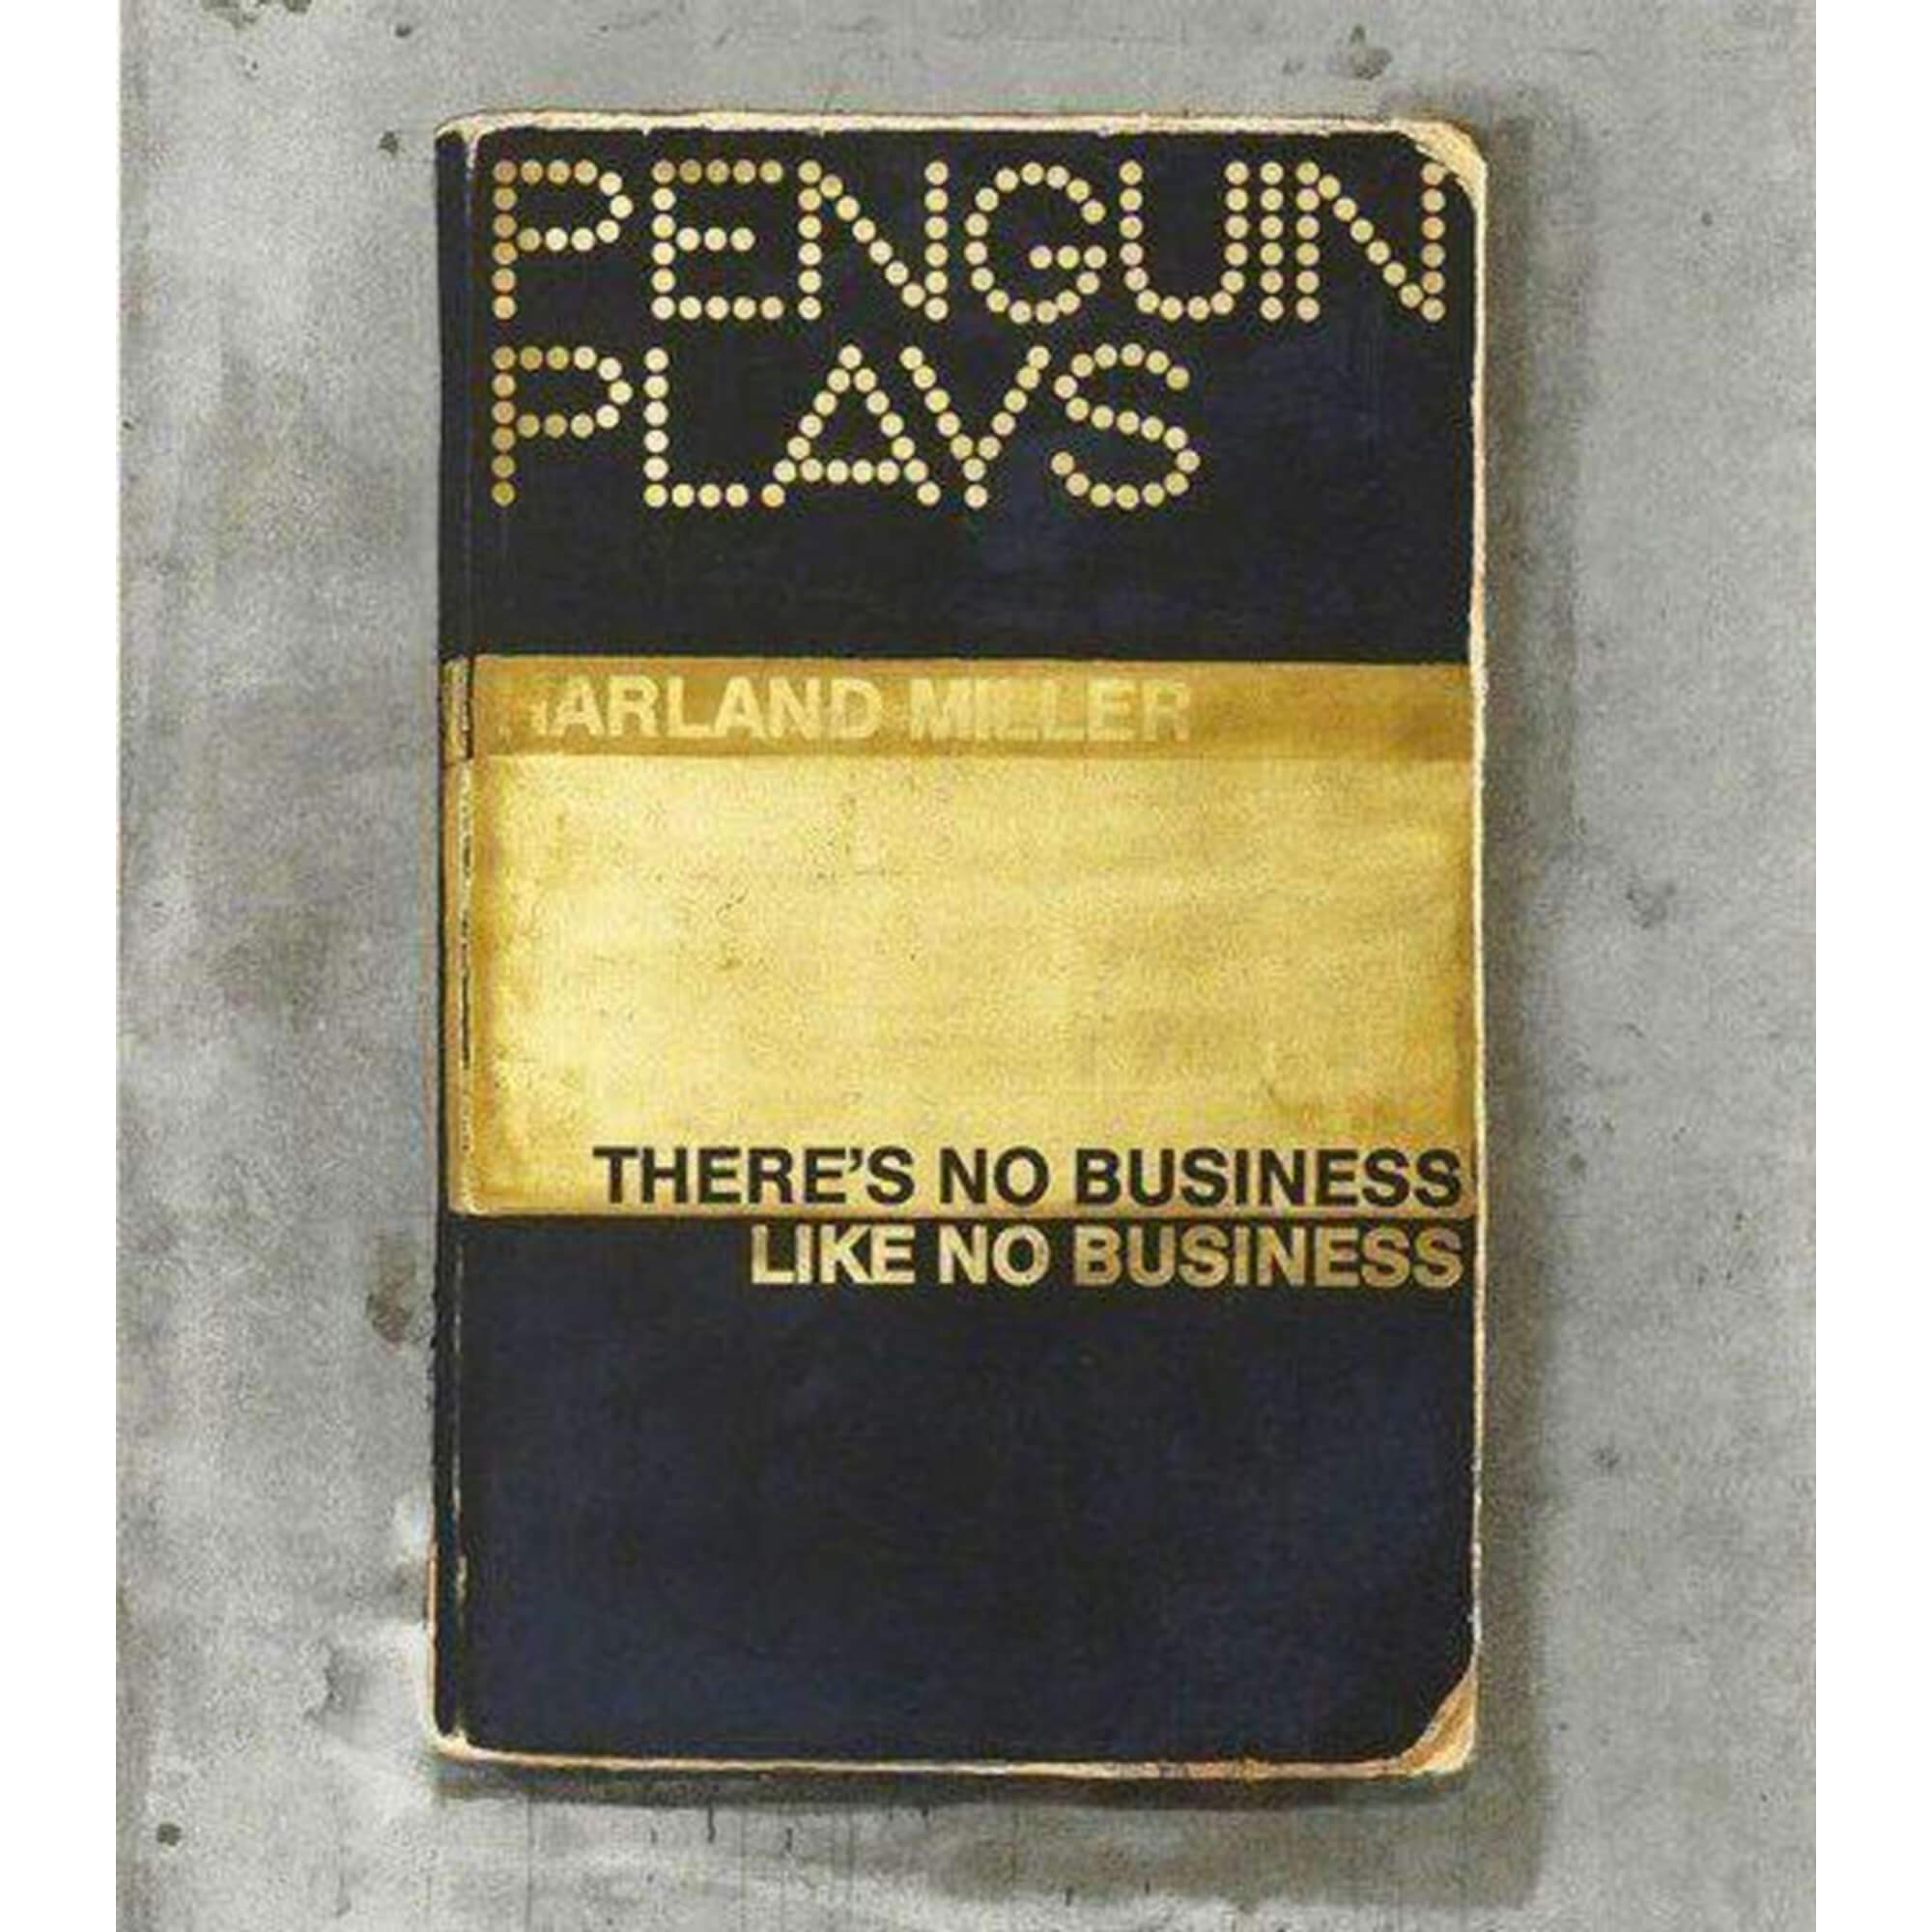 Harland Miller-There’s No Business Like No Business - Harland Miller-art print